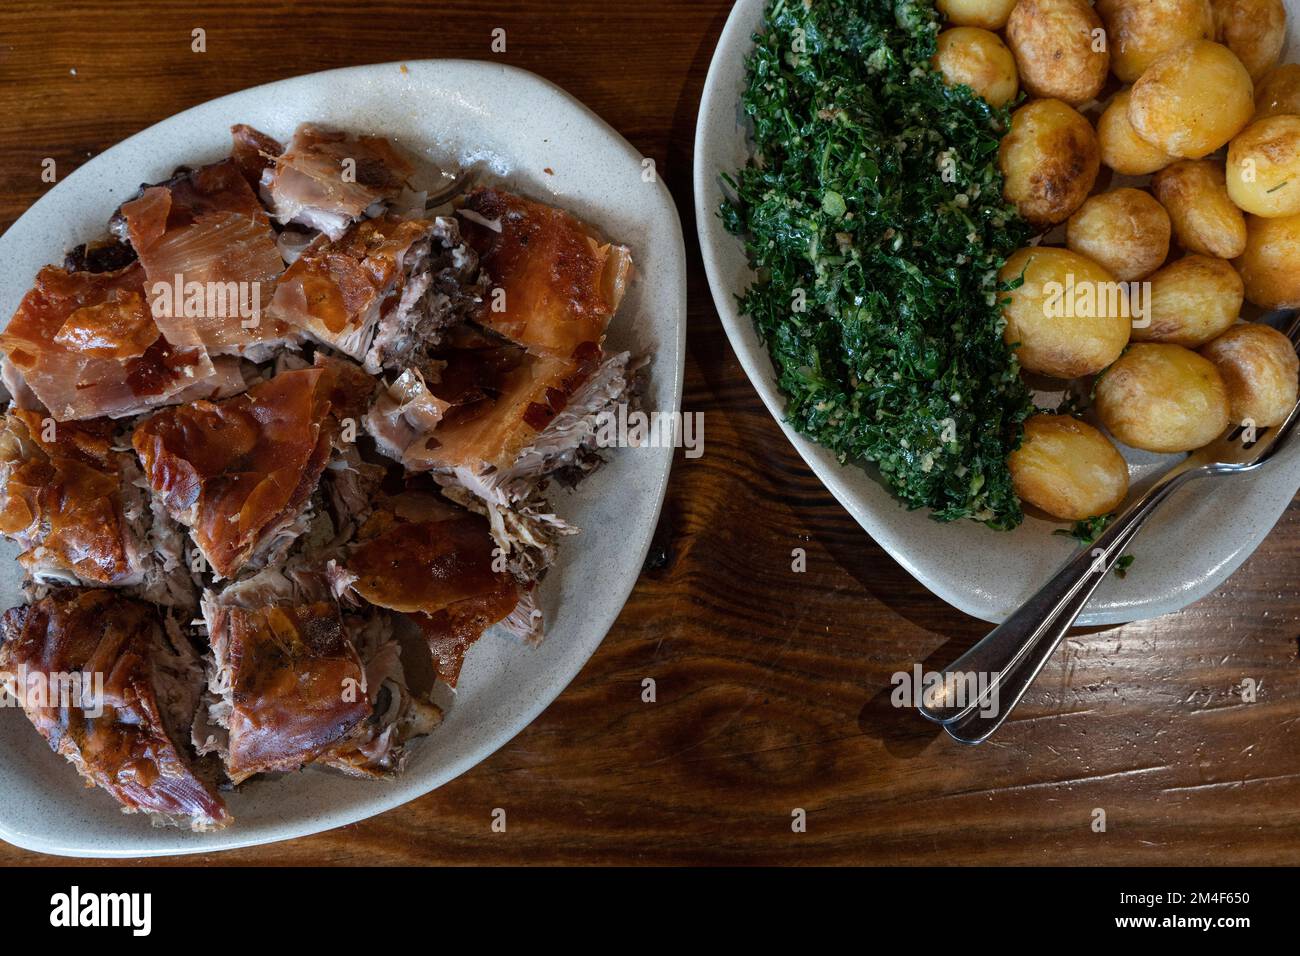 Cabrito estonado portuguese oven rosted goatling dish from the region of Oleiros, Portugal, Europe with a side dish of roasted potatoes and cabbage Stock Photo